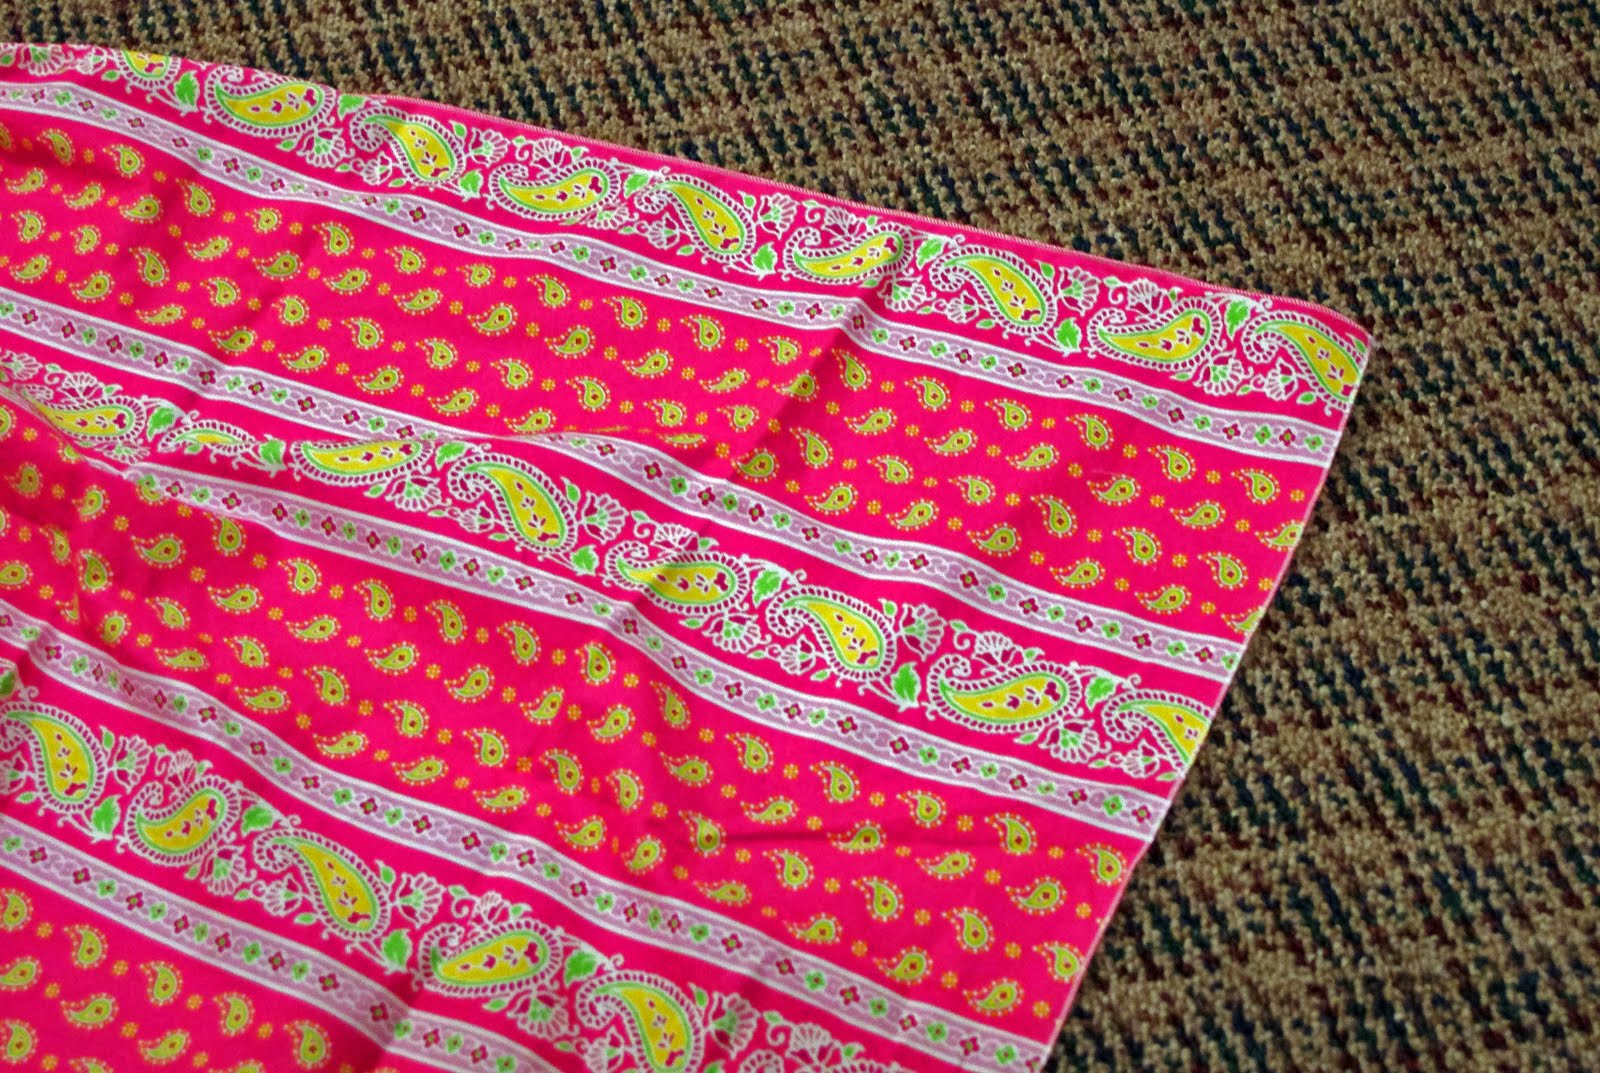 SquigglyTwigs Designs: Tuesday's Tute: Quilt Remake